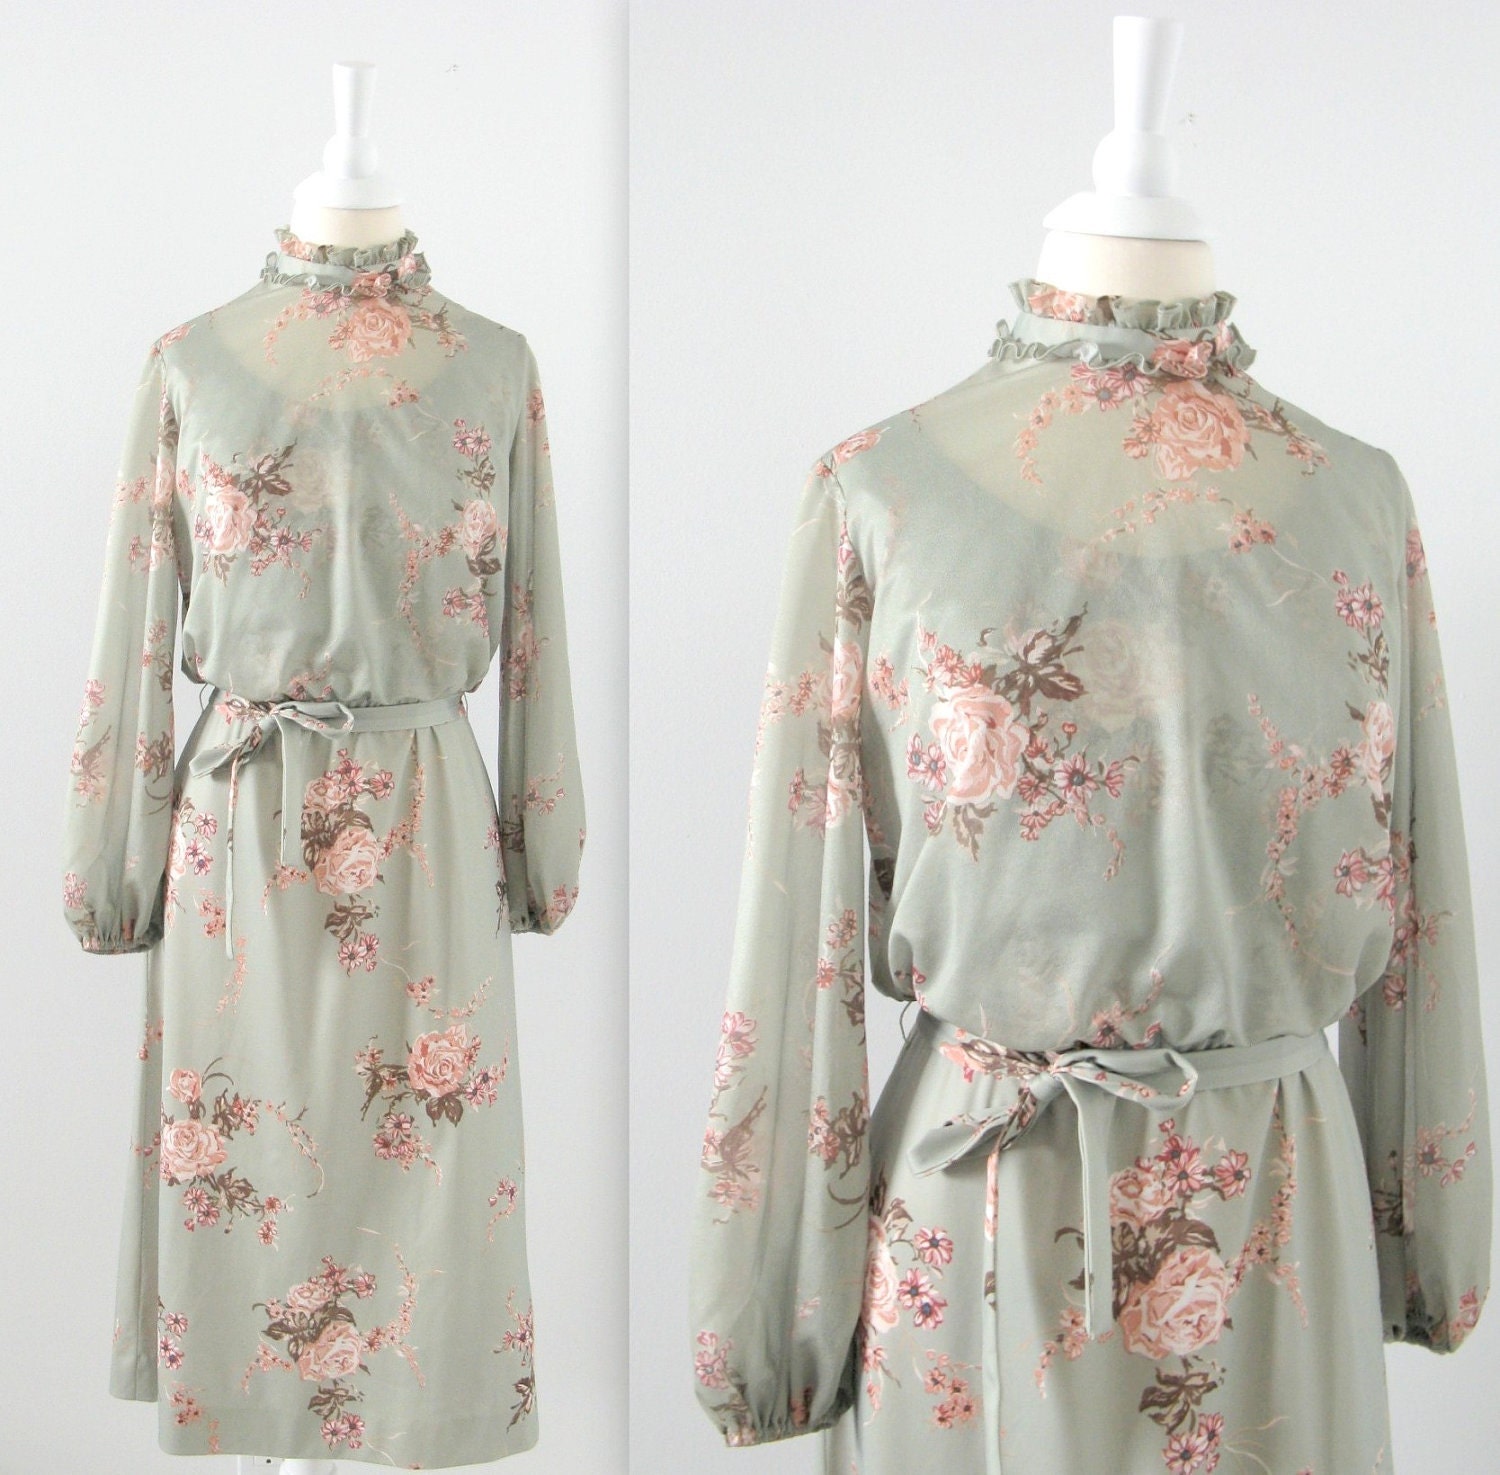 Vintage Floral Day Dress  - Sage Green and Pink - 1960s - Small - TwoMoxie